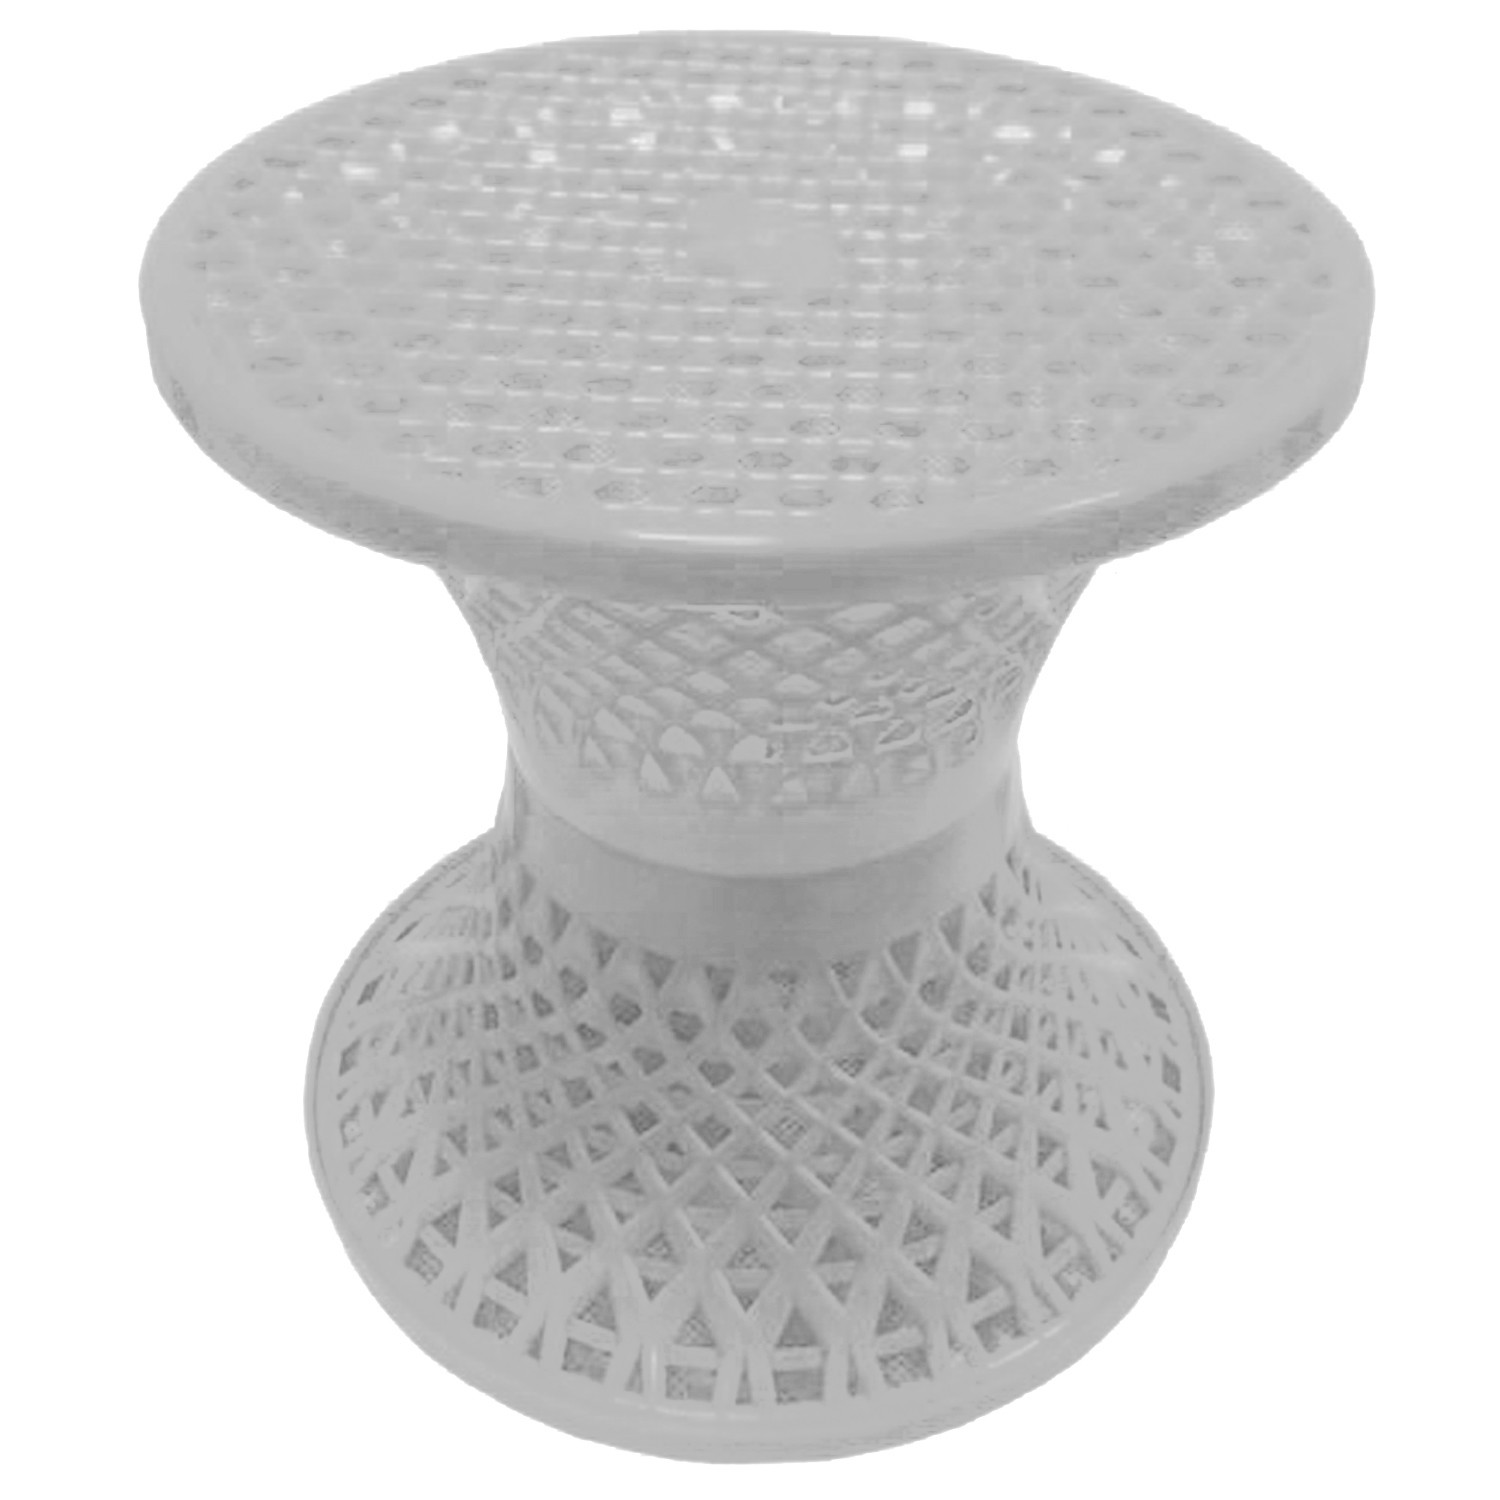 Kuber Industries Mesh Design Both Sided Plastic Sitting Stool, Planter Stand, Sidetable For Living Room, Bed Room, Garden in Damroo Style- Pack of 2 (White & Yellow)